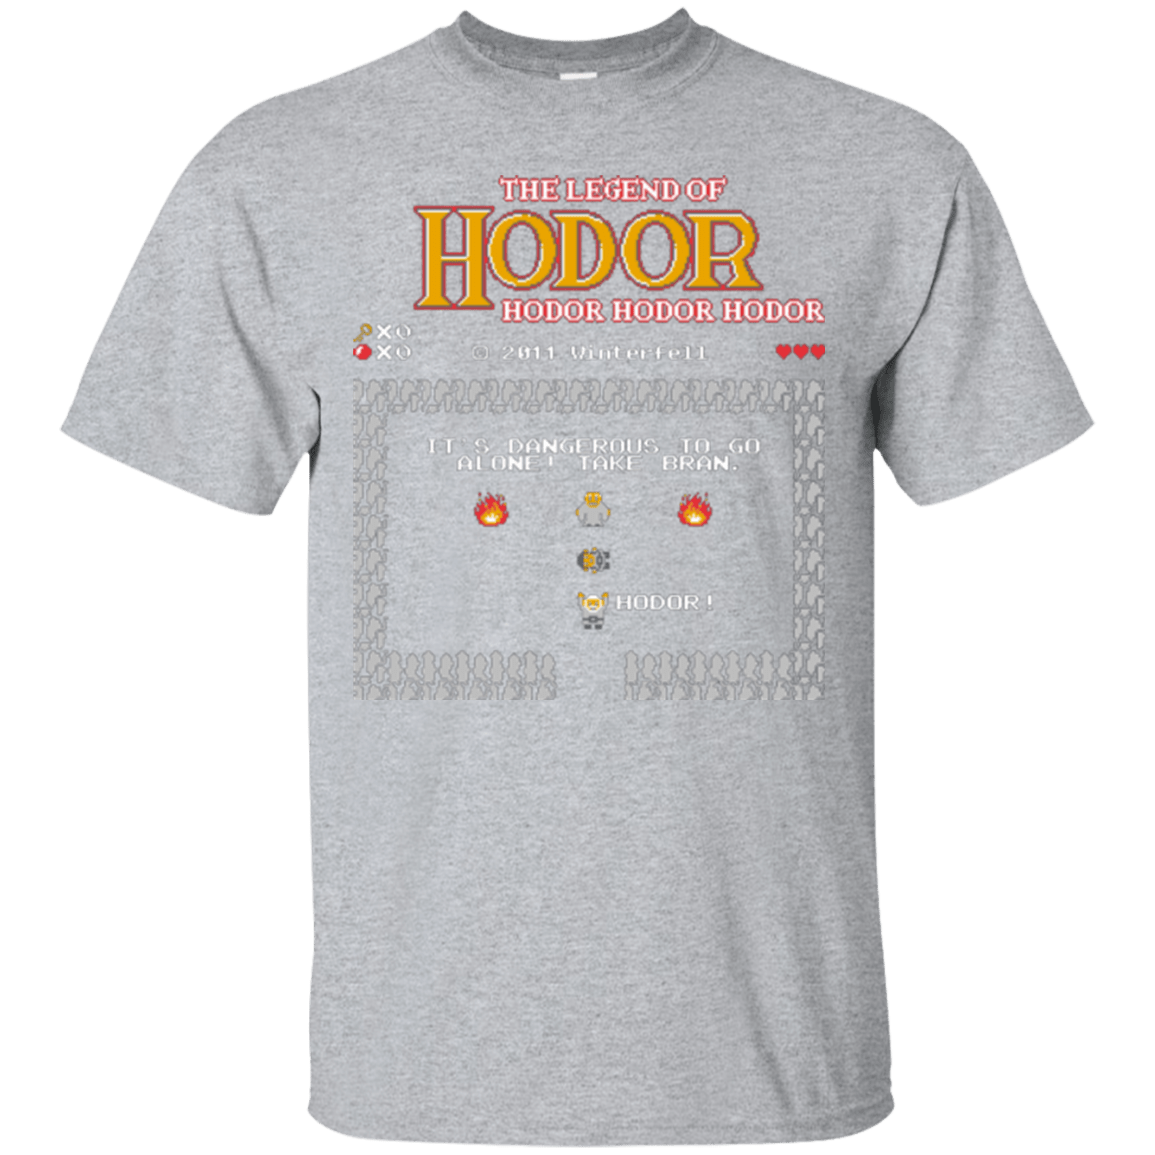 T-Shirts Sport Grey / Small The Legend of Hodor T-Shirt